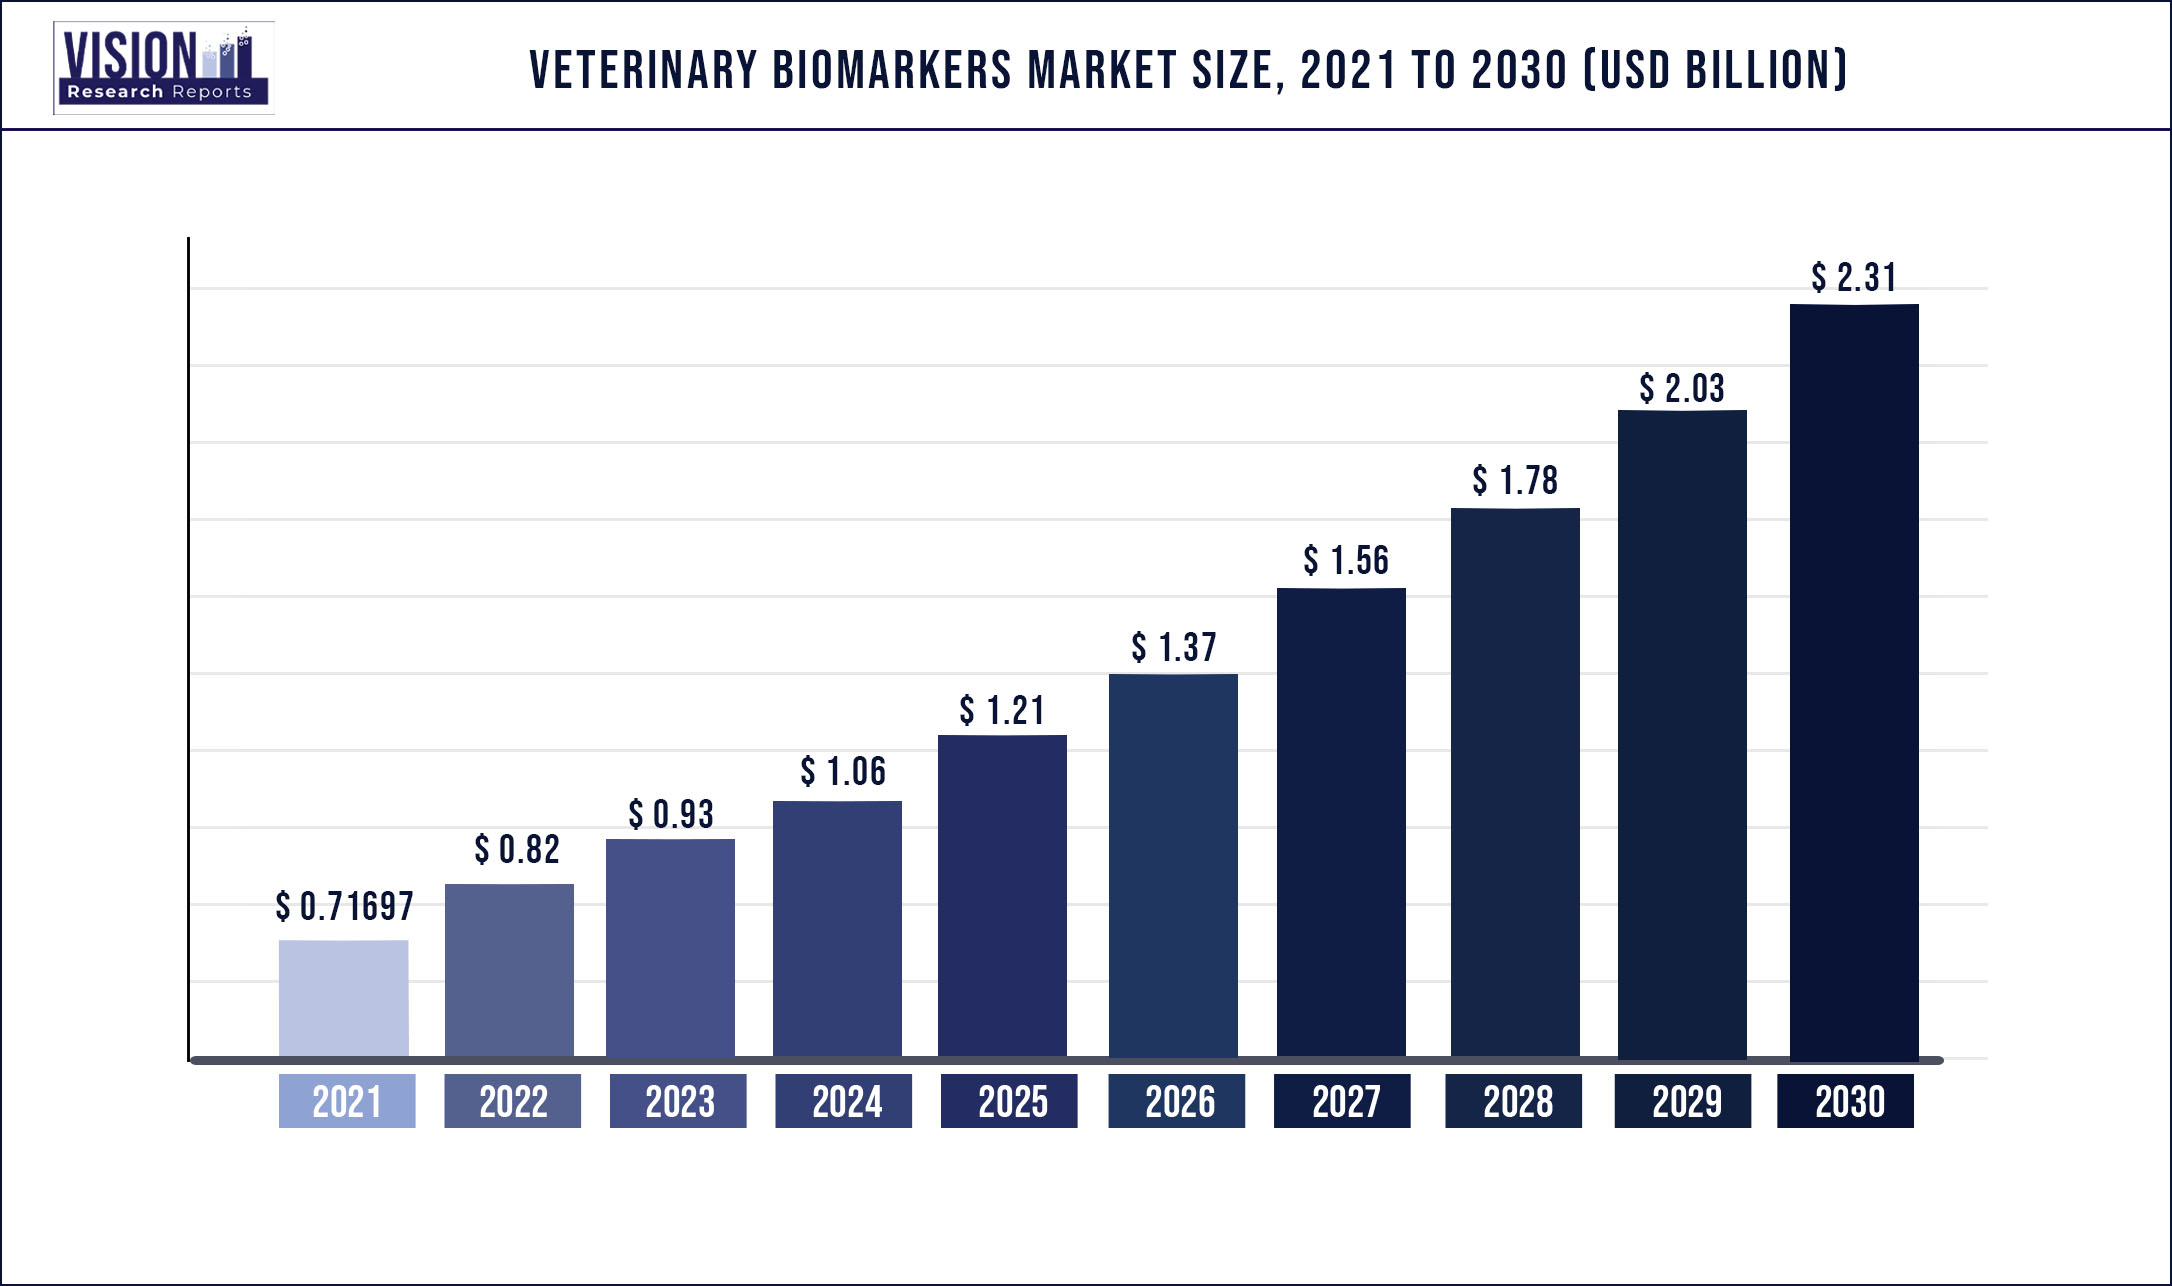 Veterinary Biomarkers Market Size 2021 to 2030